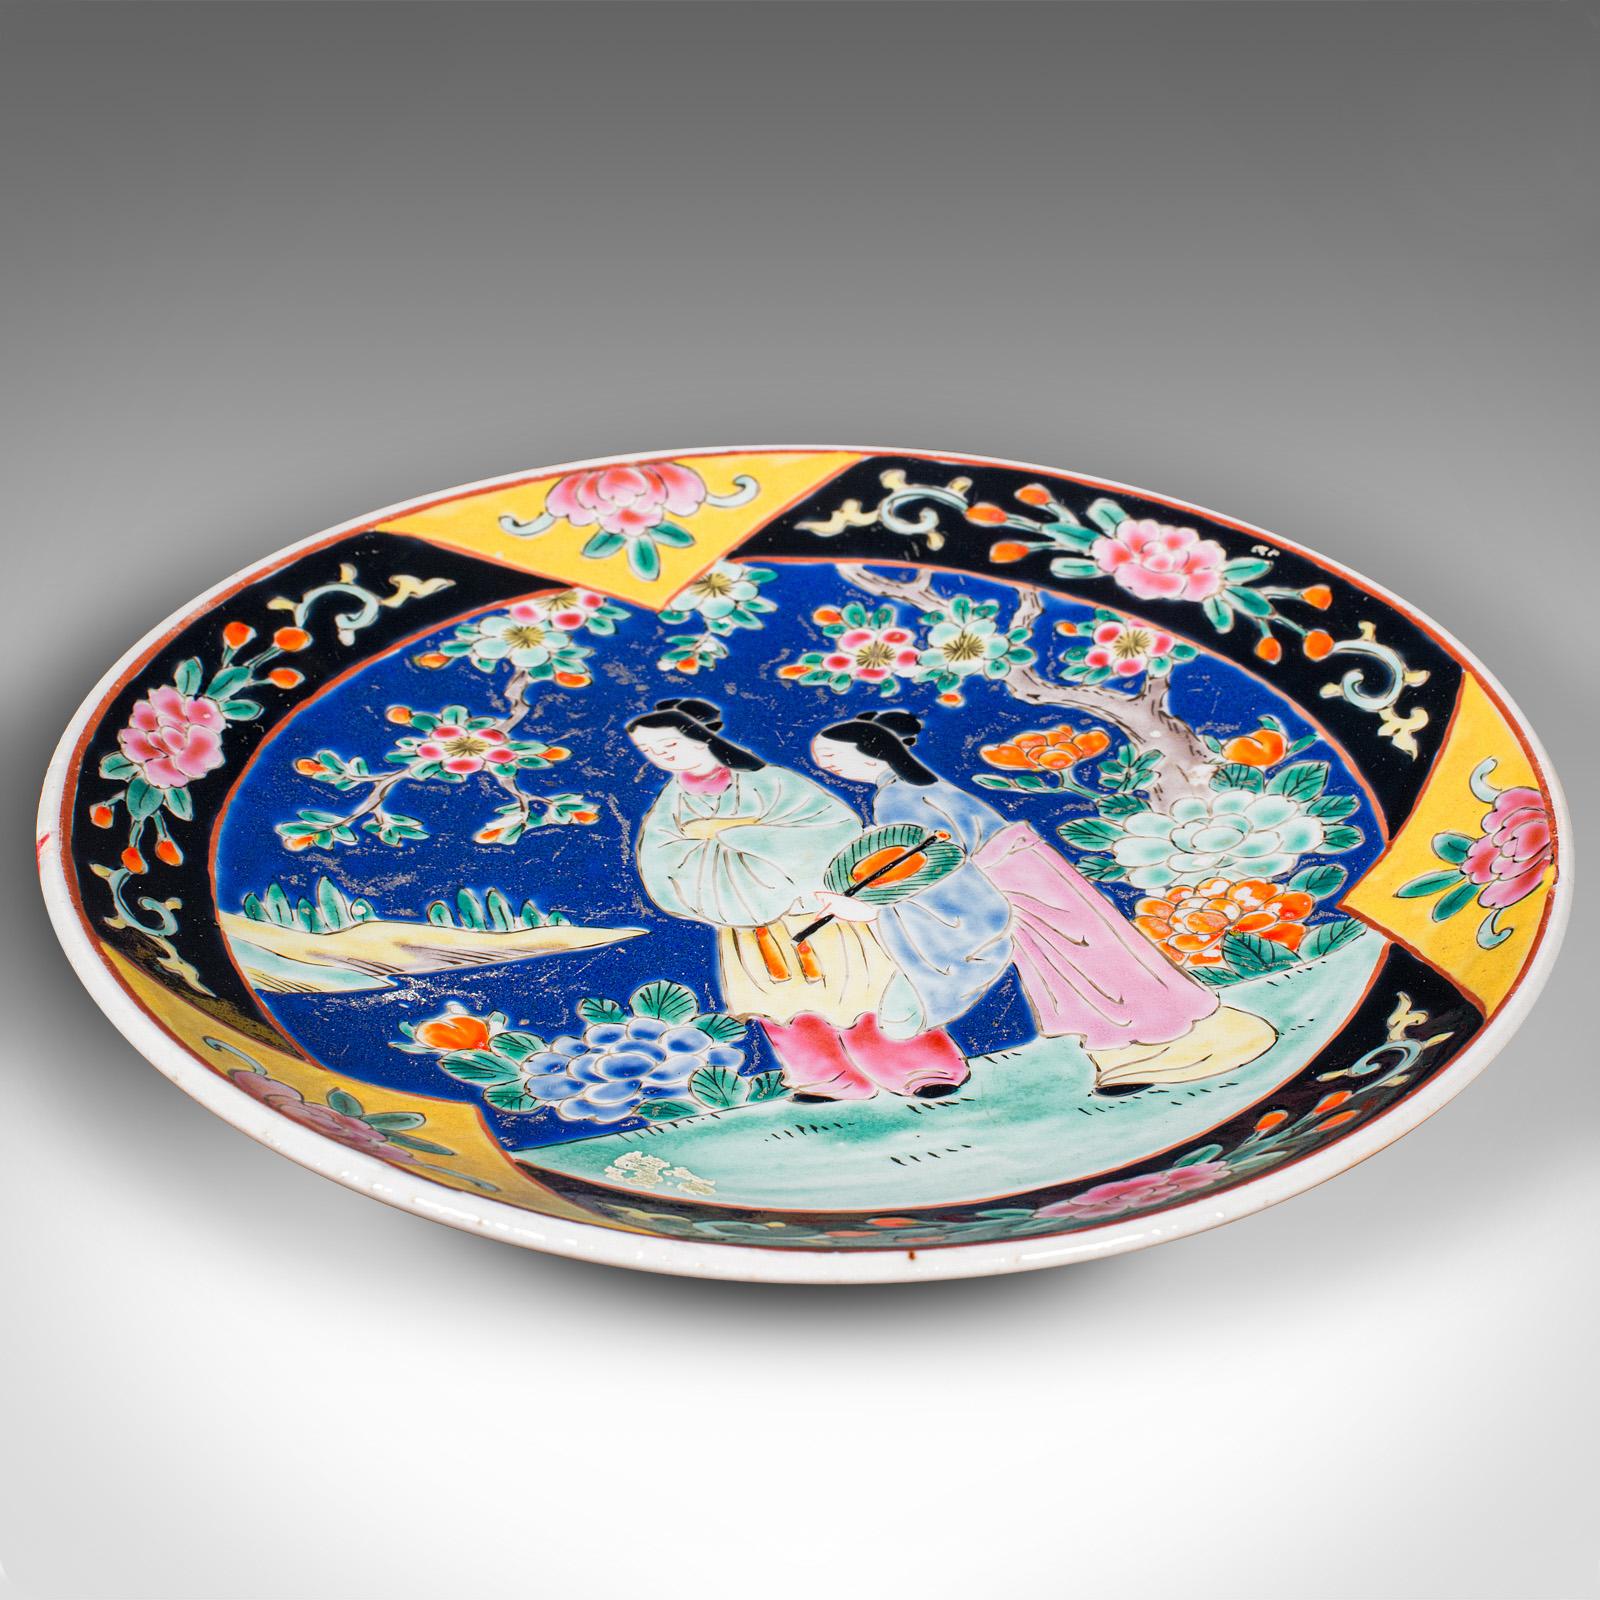 Antique Decorative Plate, Chinese, Ceramic, Display Charger, Qing, Victorian In Good Condition For Sale In Hele, Devon, GB